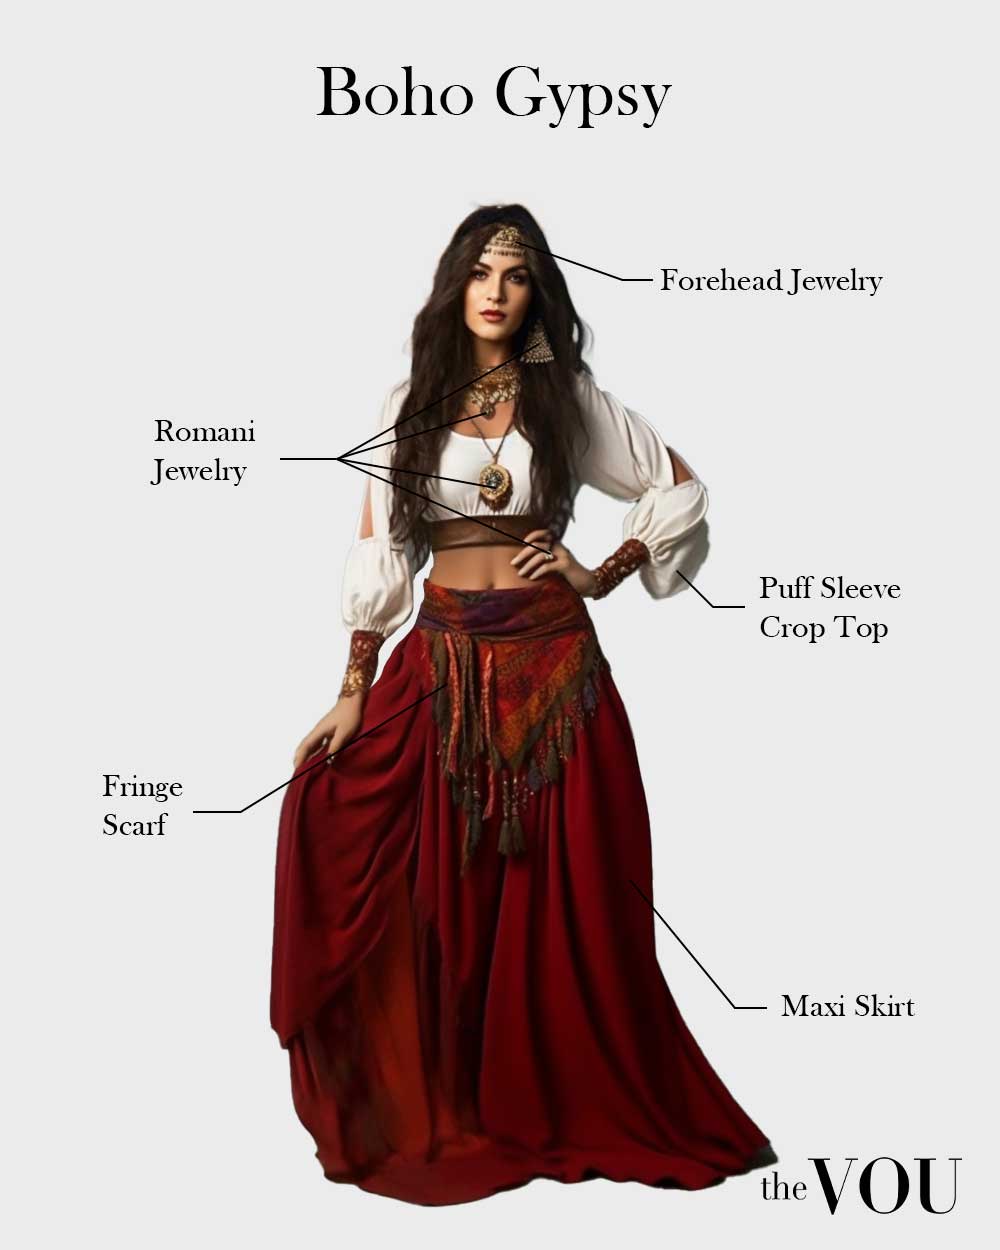 boho gypsy outfit with puff sleeve crop top, maxi skirt, and romani jewelry